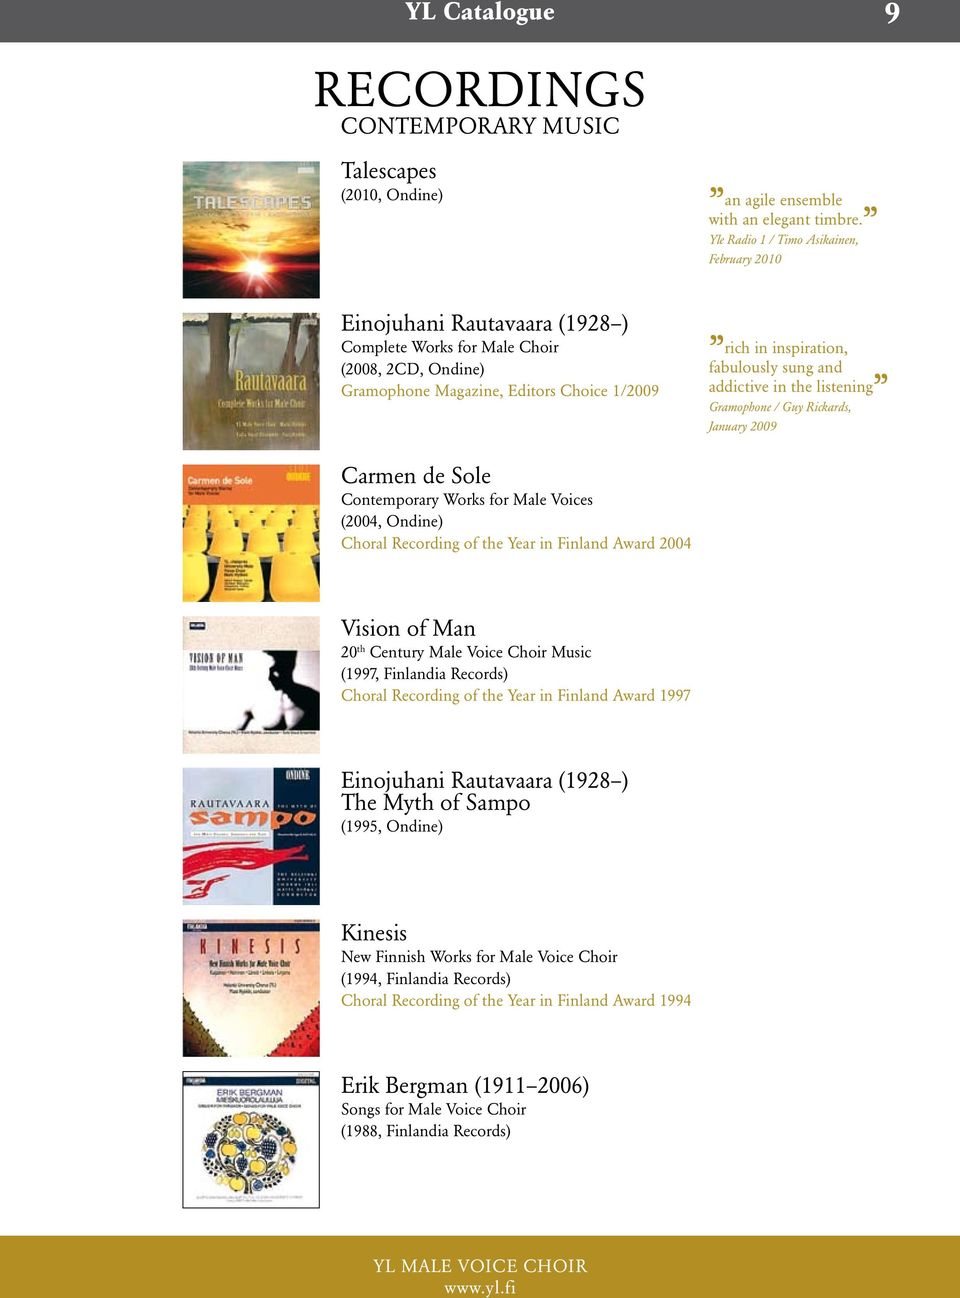 sung and addictive in the listening Gramophone / Guy Rickards, January 2009 Carmen de Sole Contemporary Works for Male Voices (2004, Ondine) Choral Recording of the Year in Finland Award 2004 Vision